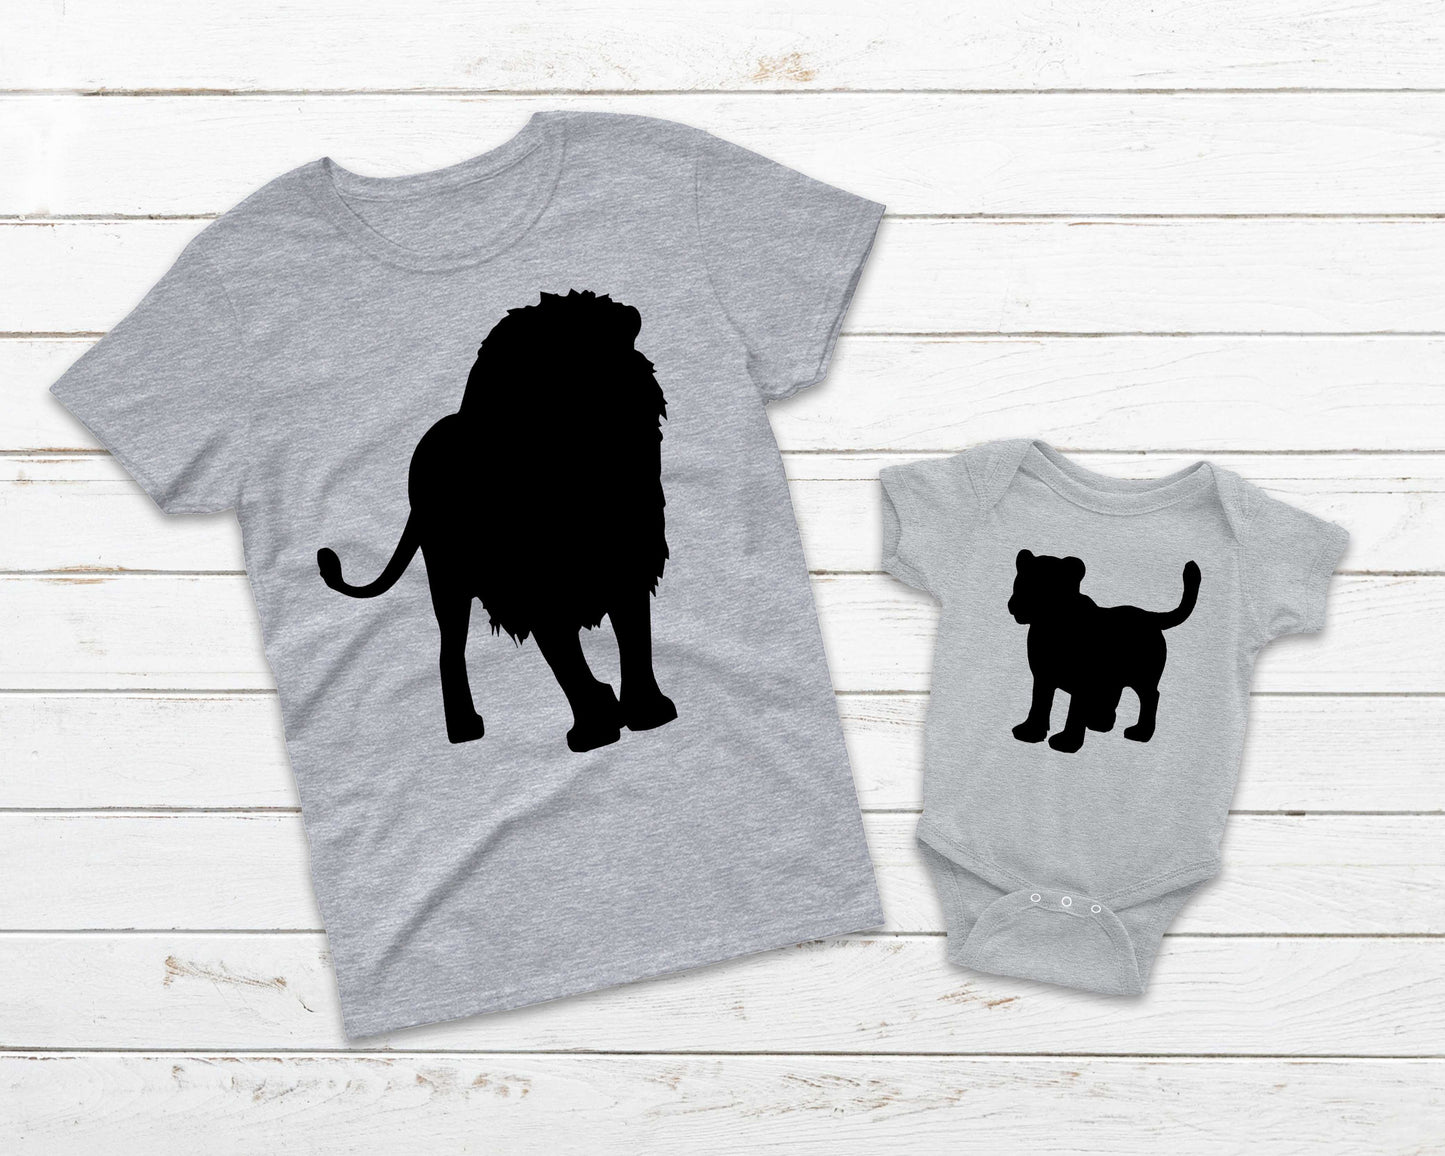 Daddy and Me Lion and Cub or Cubs Matching Father and Child Shirt Set - Choose Your Sizes - Father&#39;s Day Shirts - Set of shirts - Custom Tee